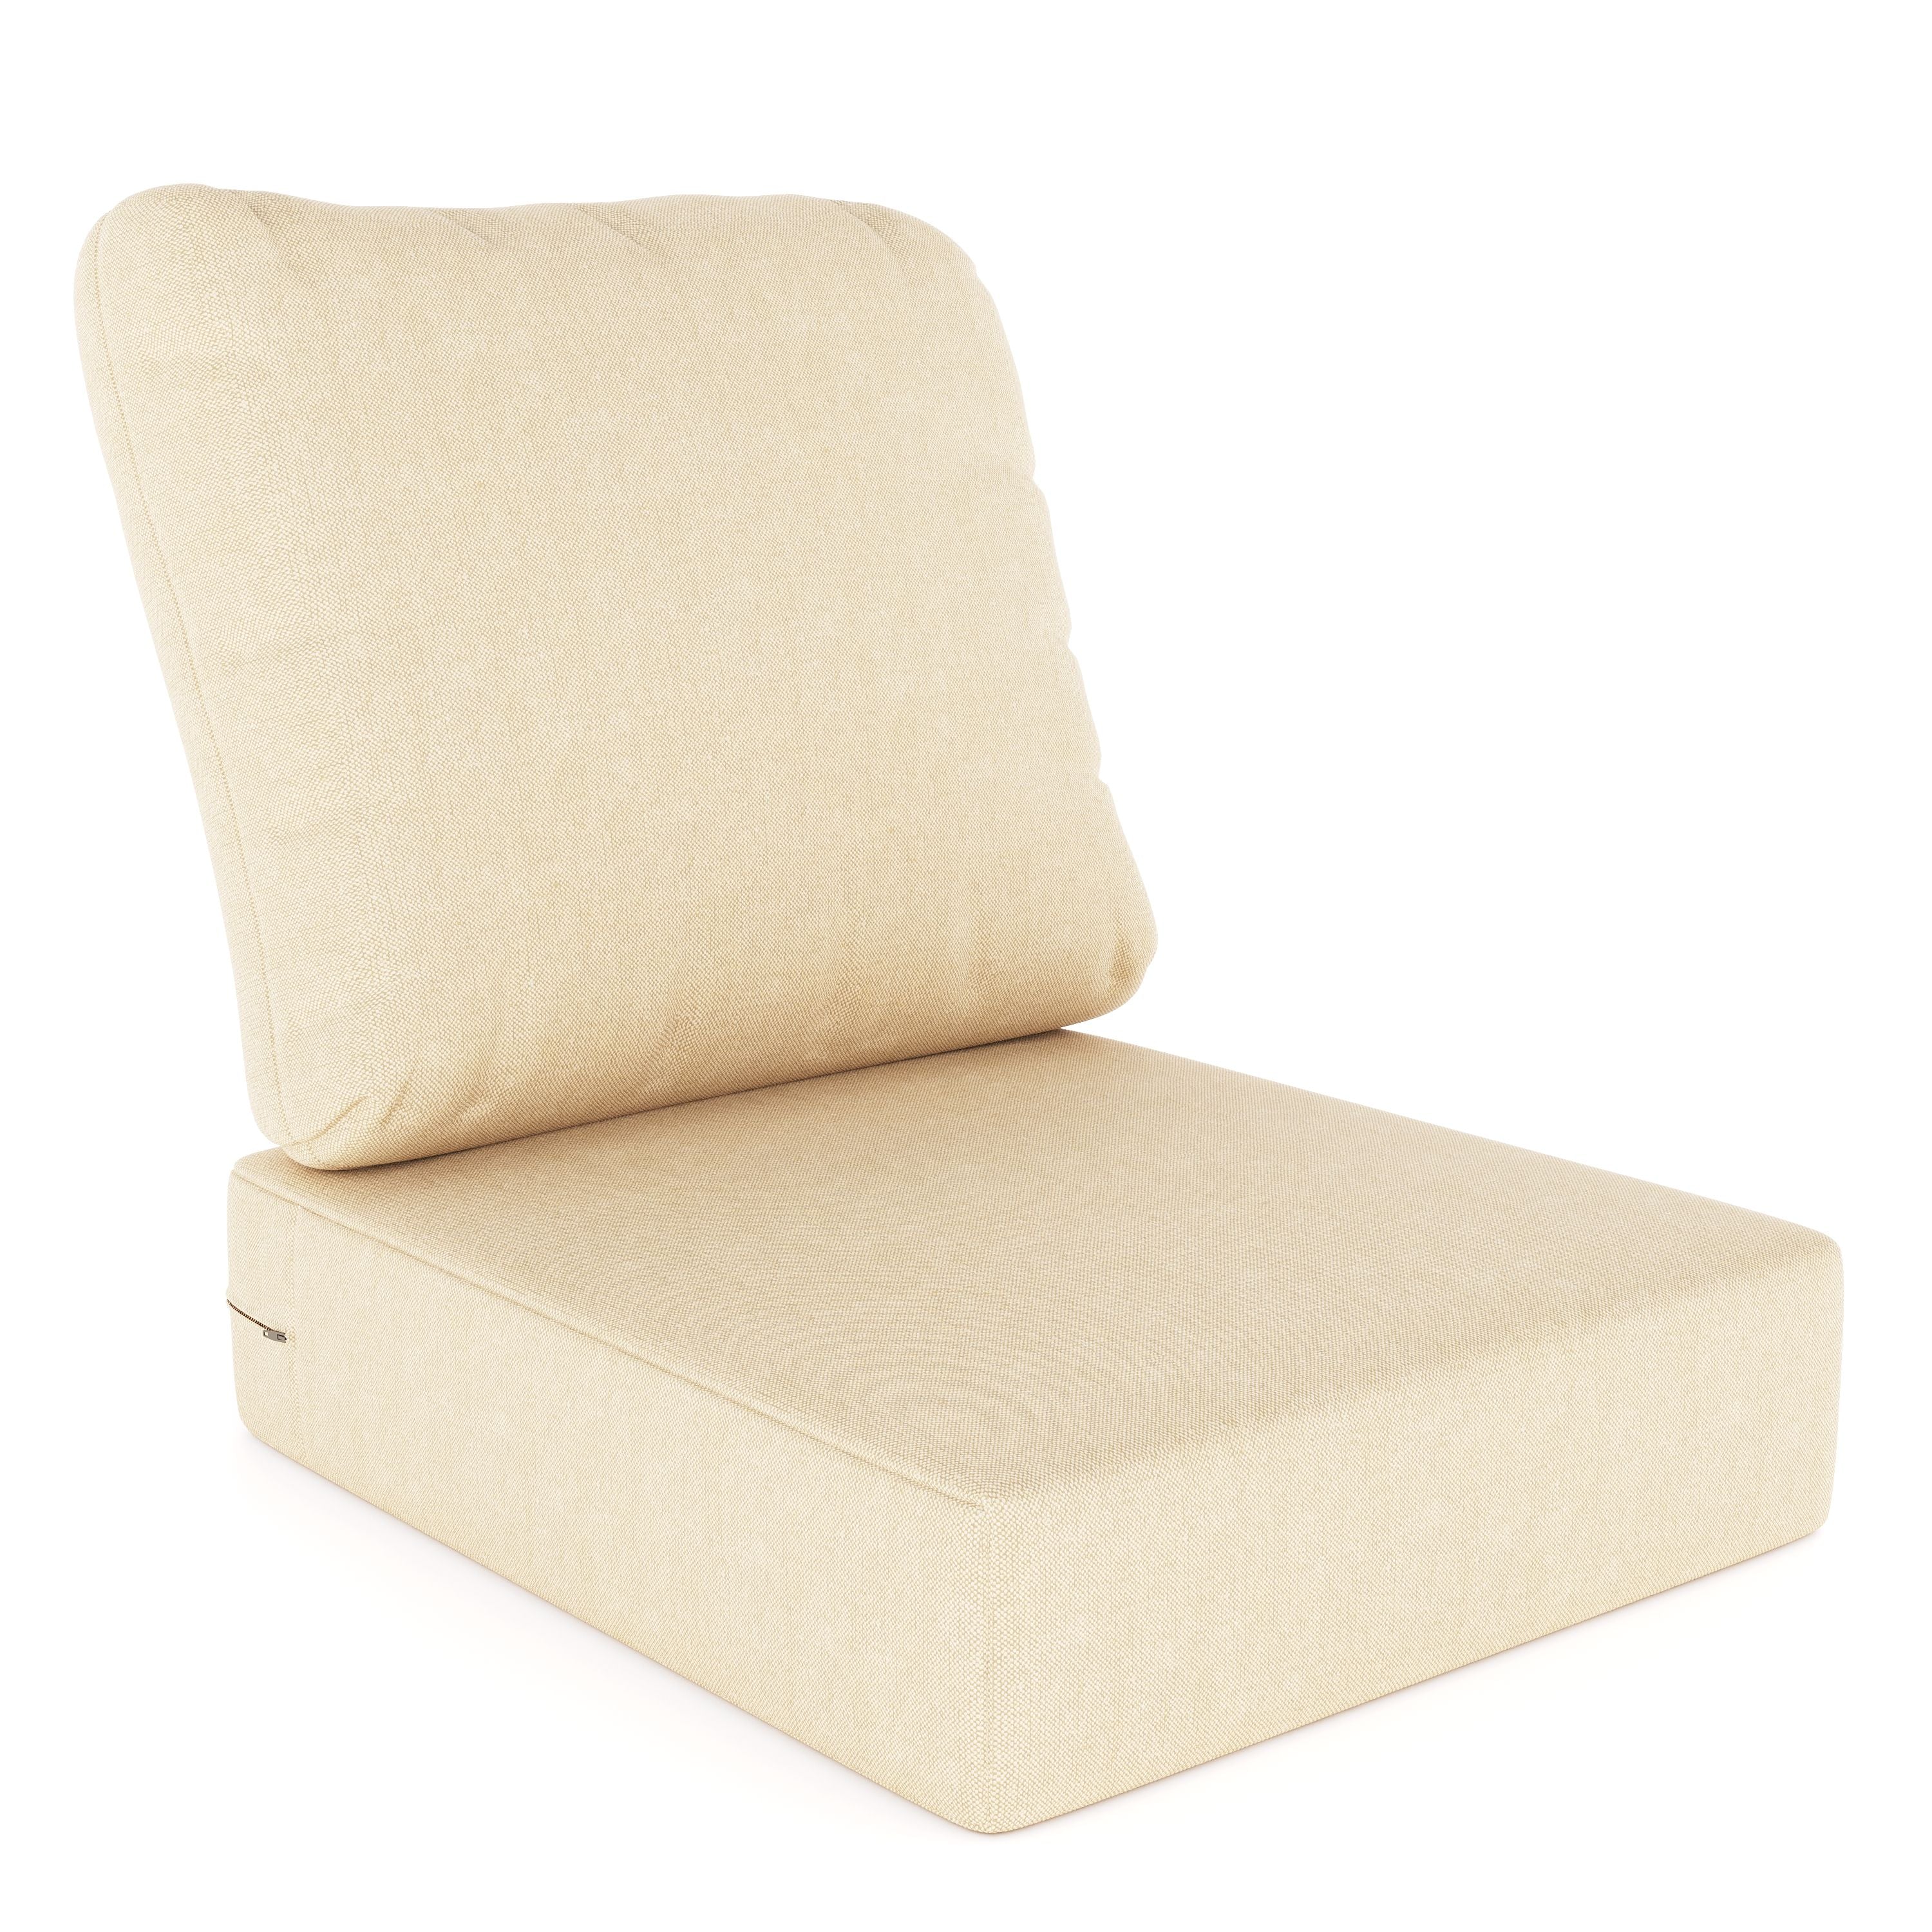 Seat and Back/Deep Seating Sofa/Loveseat Ends Right and Left - Replacement Cushions